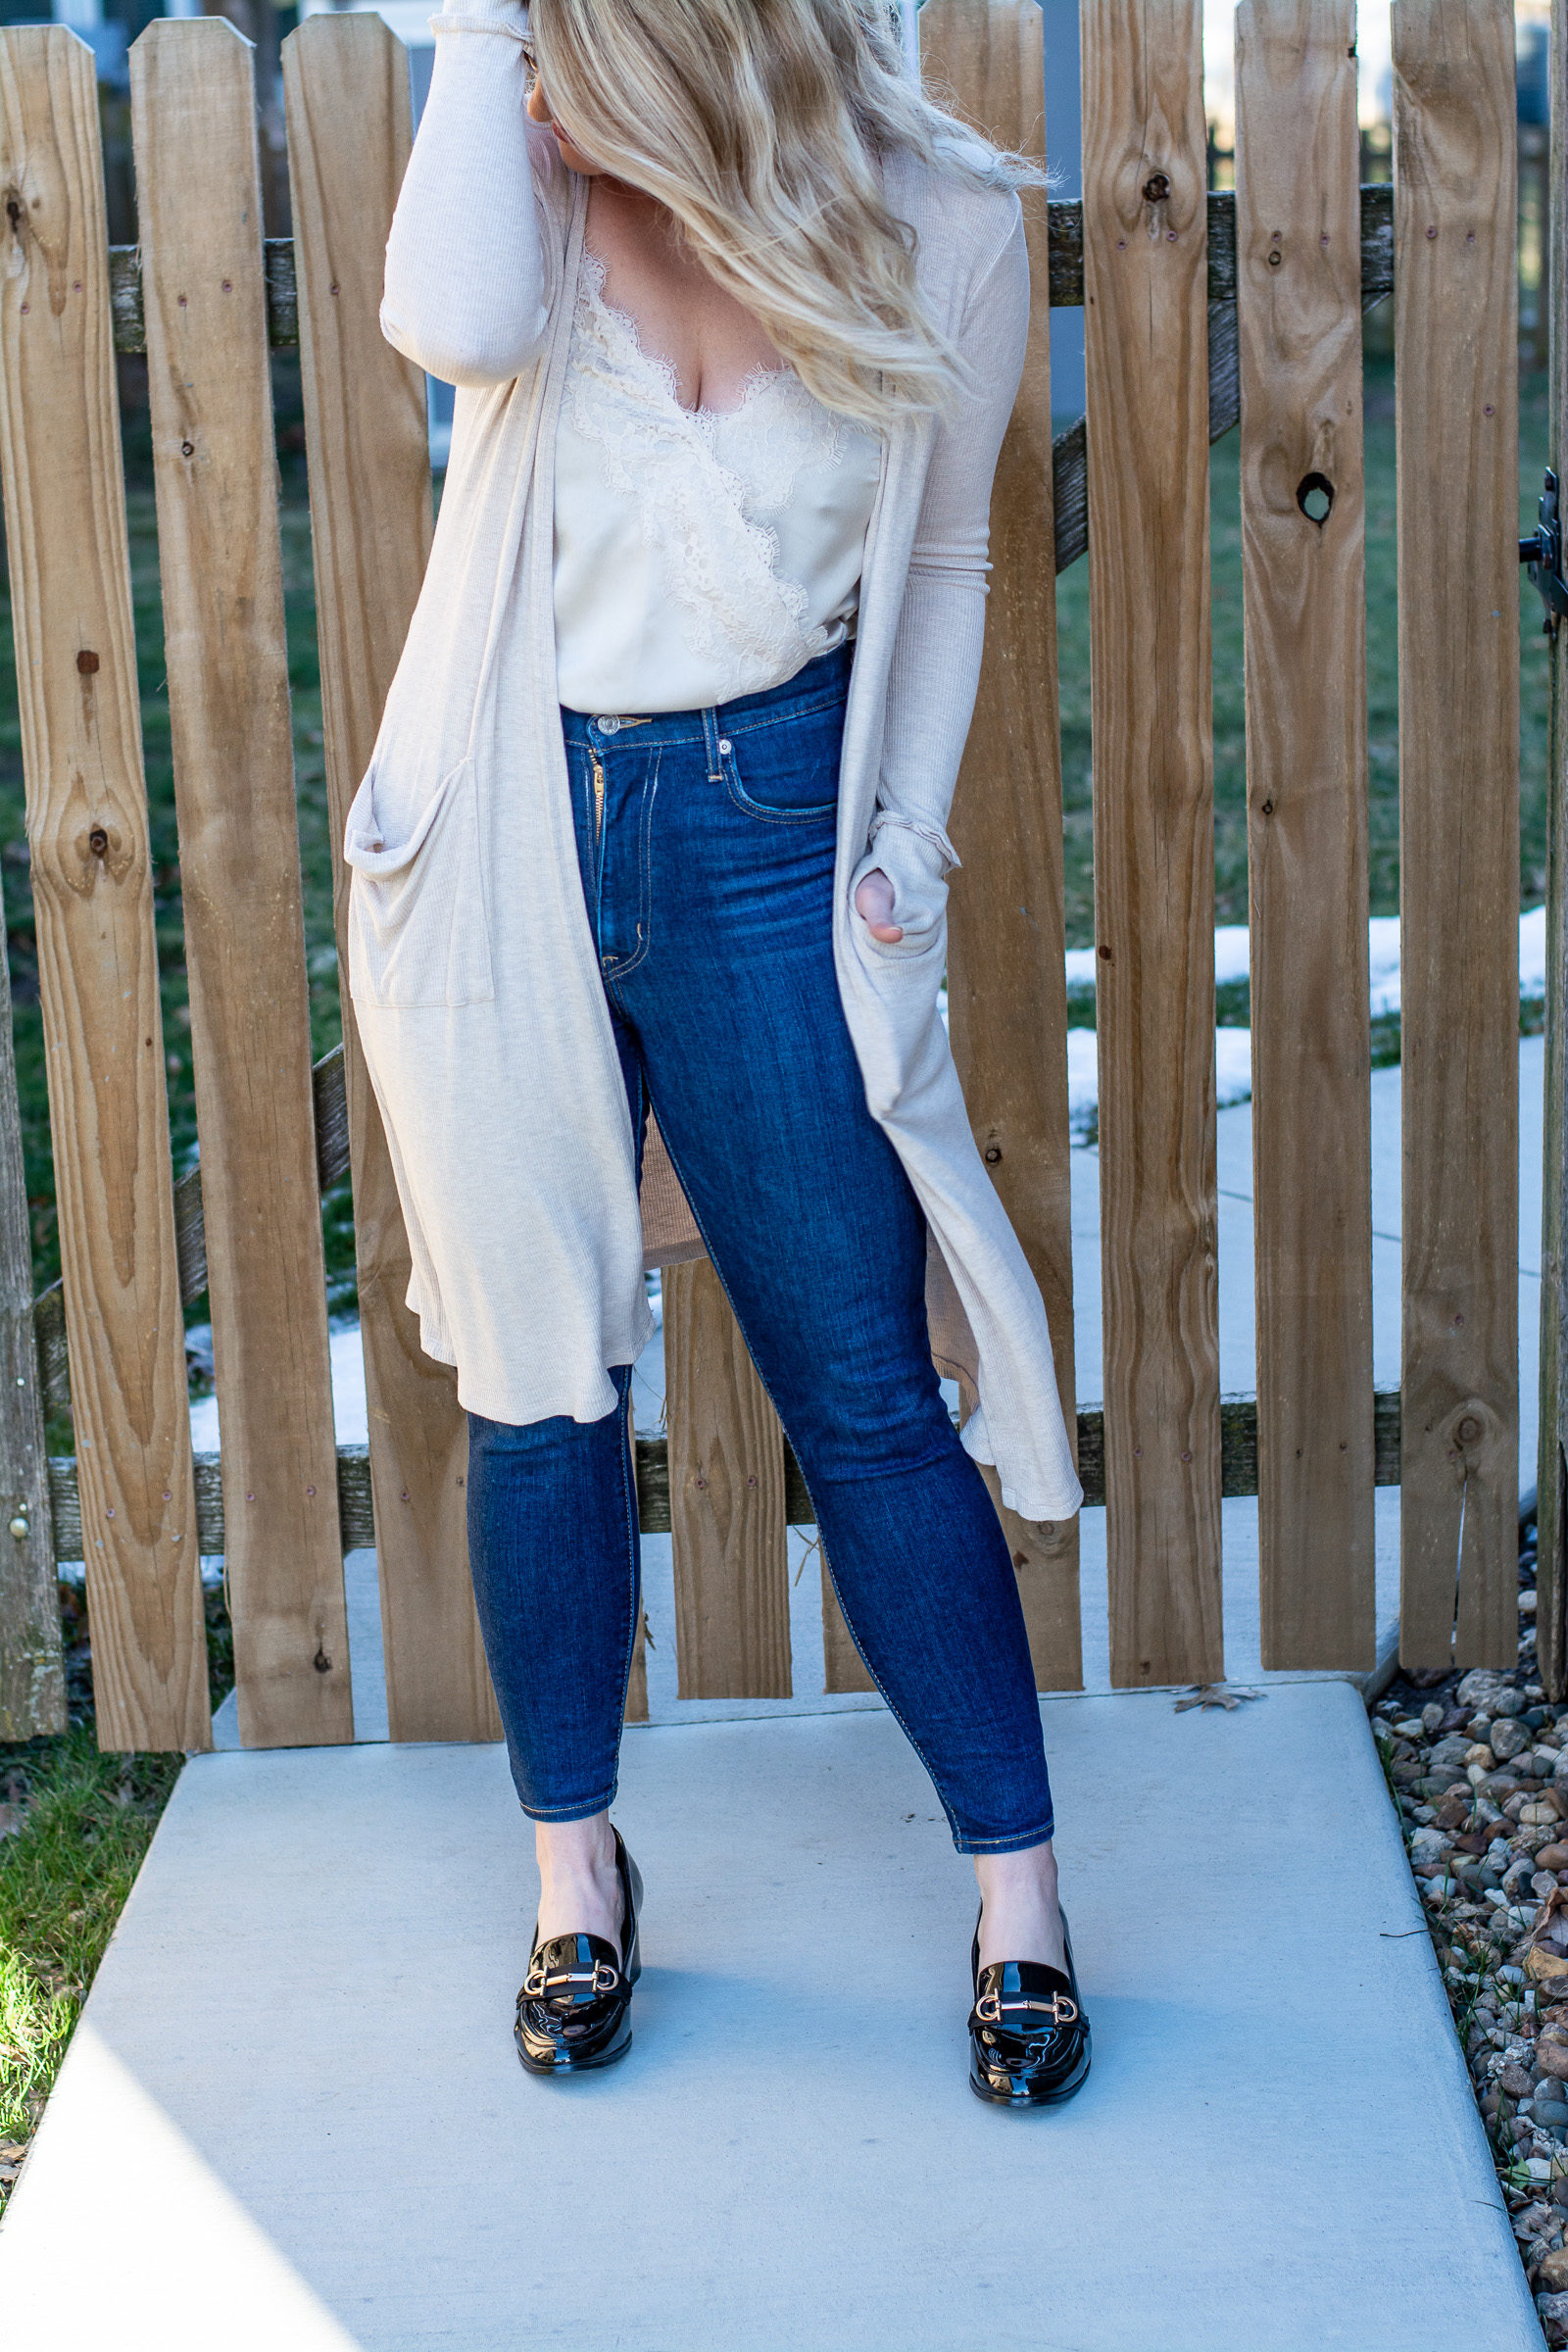 Long Cardigan + Patent Loafers. | LSR